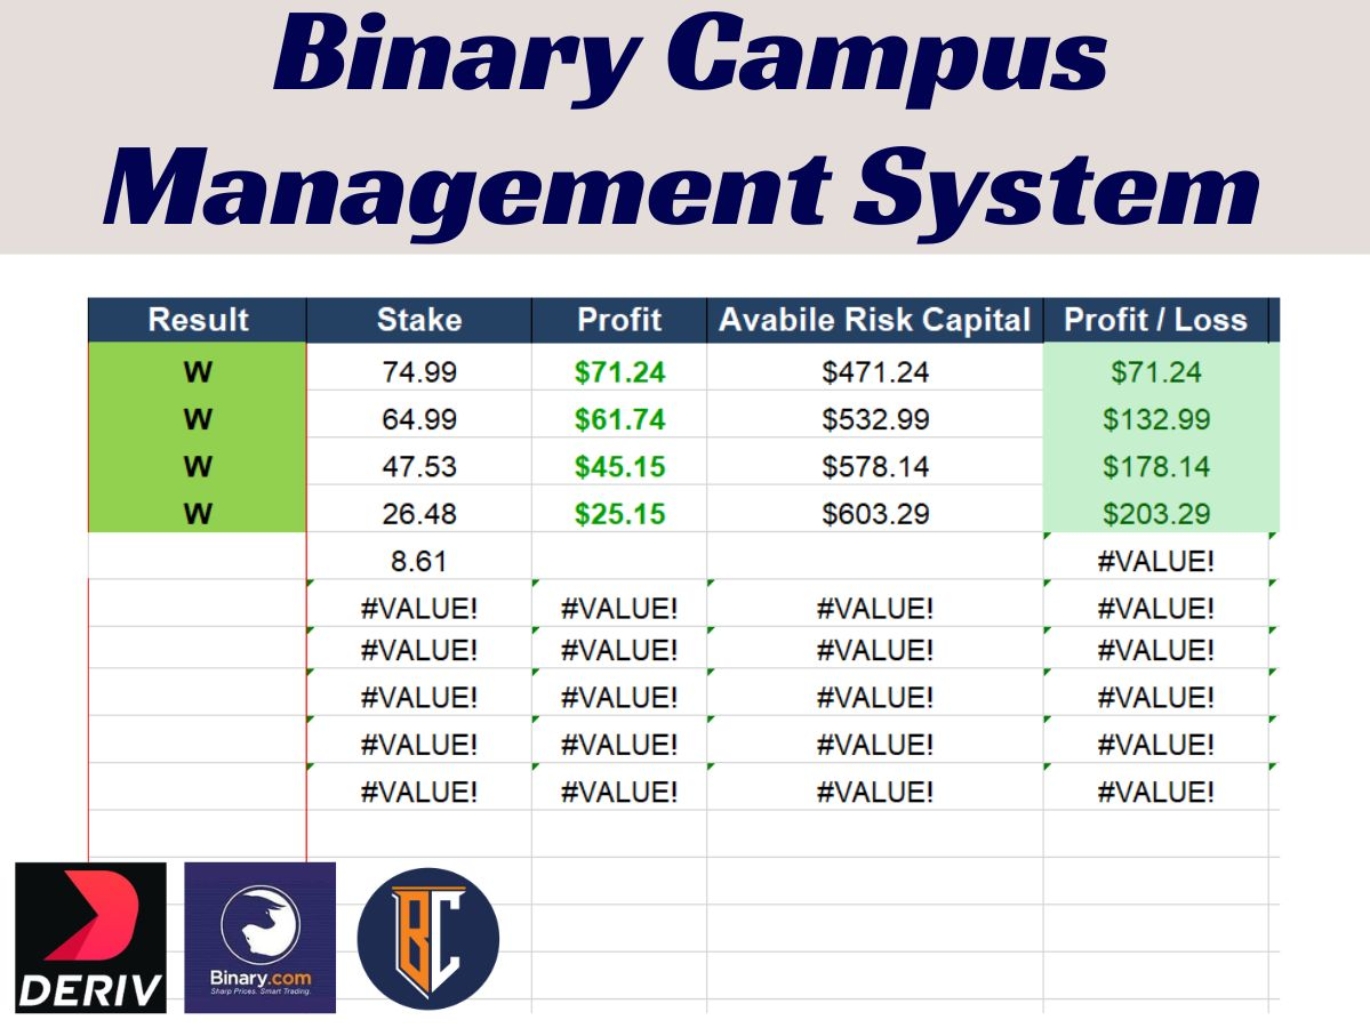 Binary Campus Management System